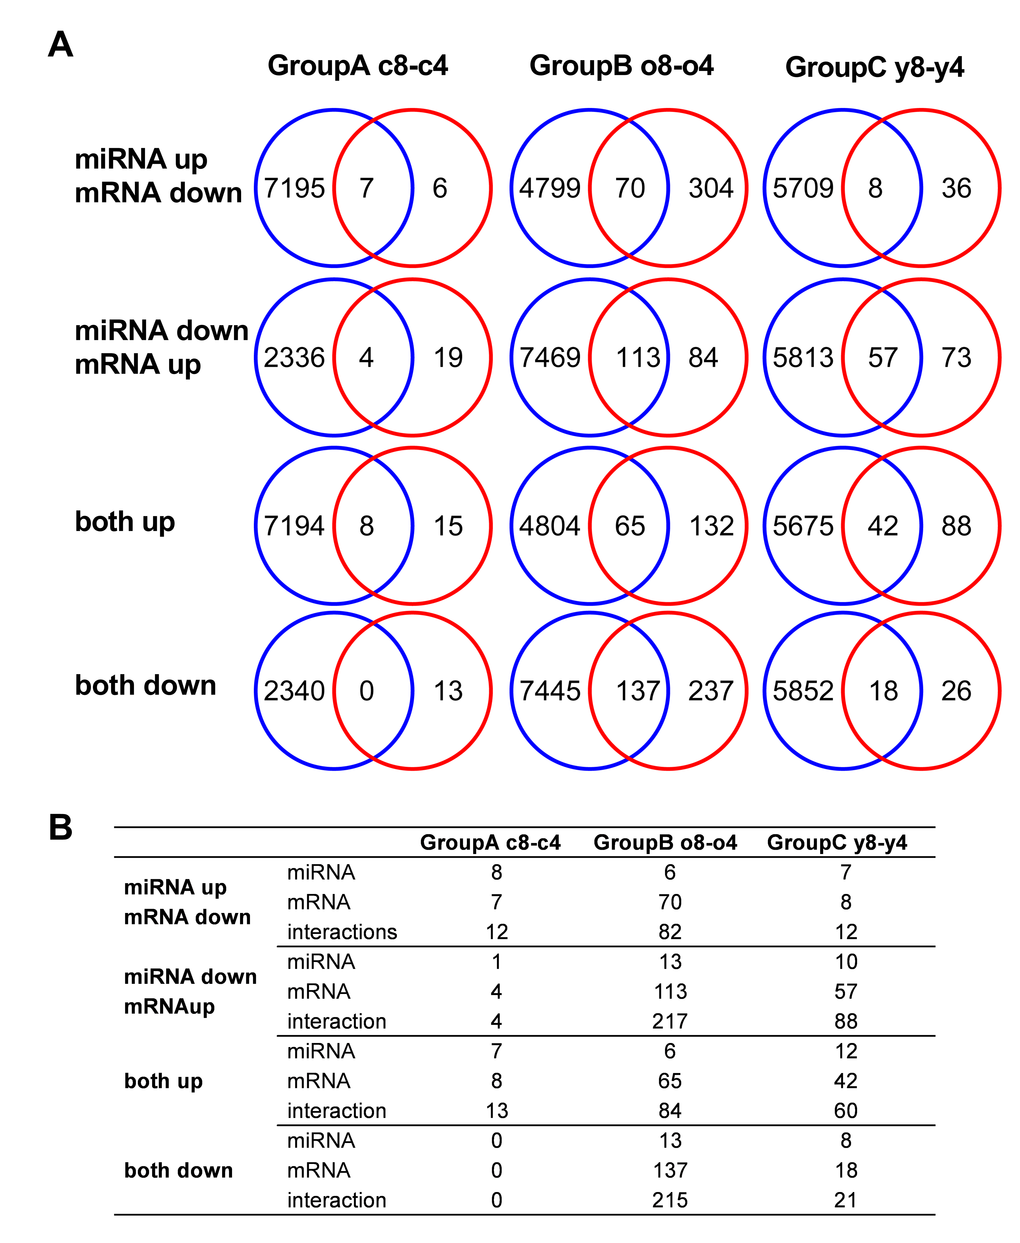 Target prediction analysis of miRNA. (A) Predicted targets for differentially expressed miRNAs were compared to the differentially expressed mRNAs in the same cells. (B) The number of putative miRNA-mRNA interactions and the number of individual miRNAs or mRNAs that account for those interactions.